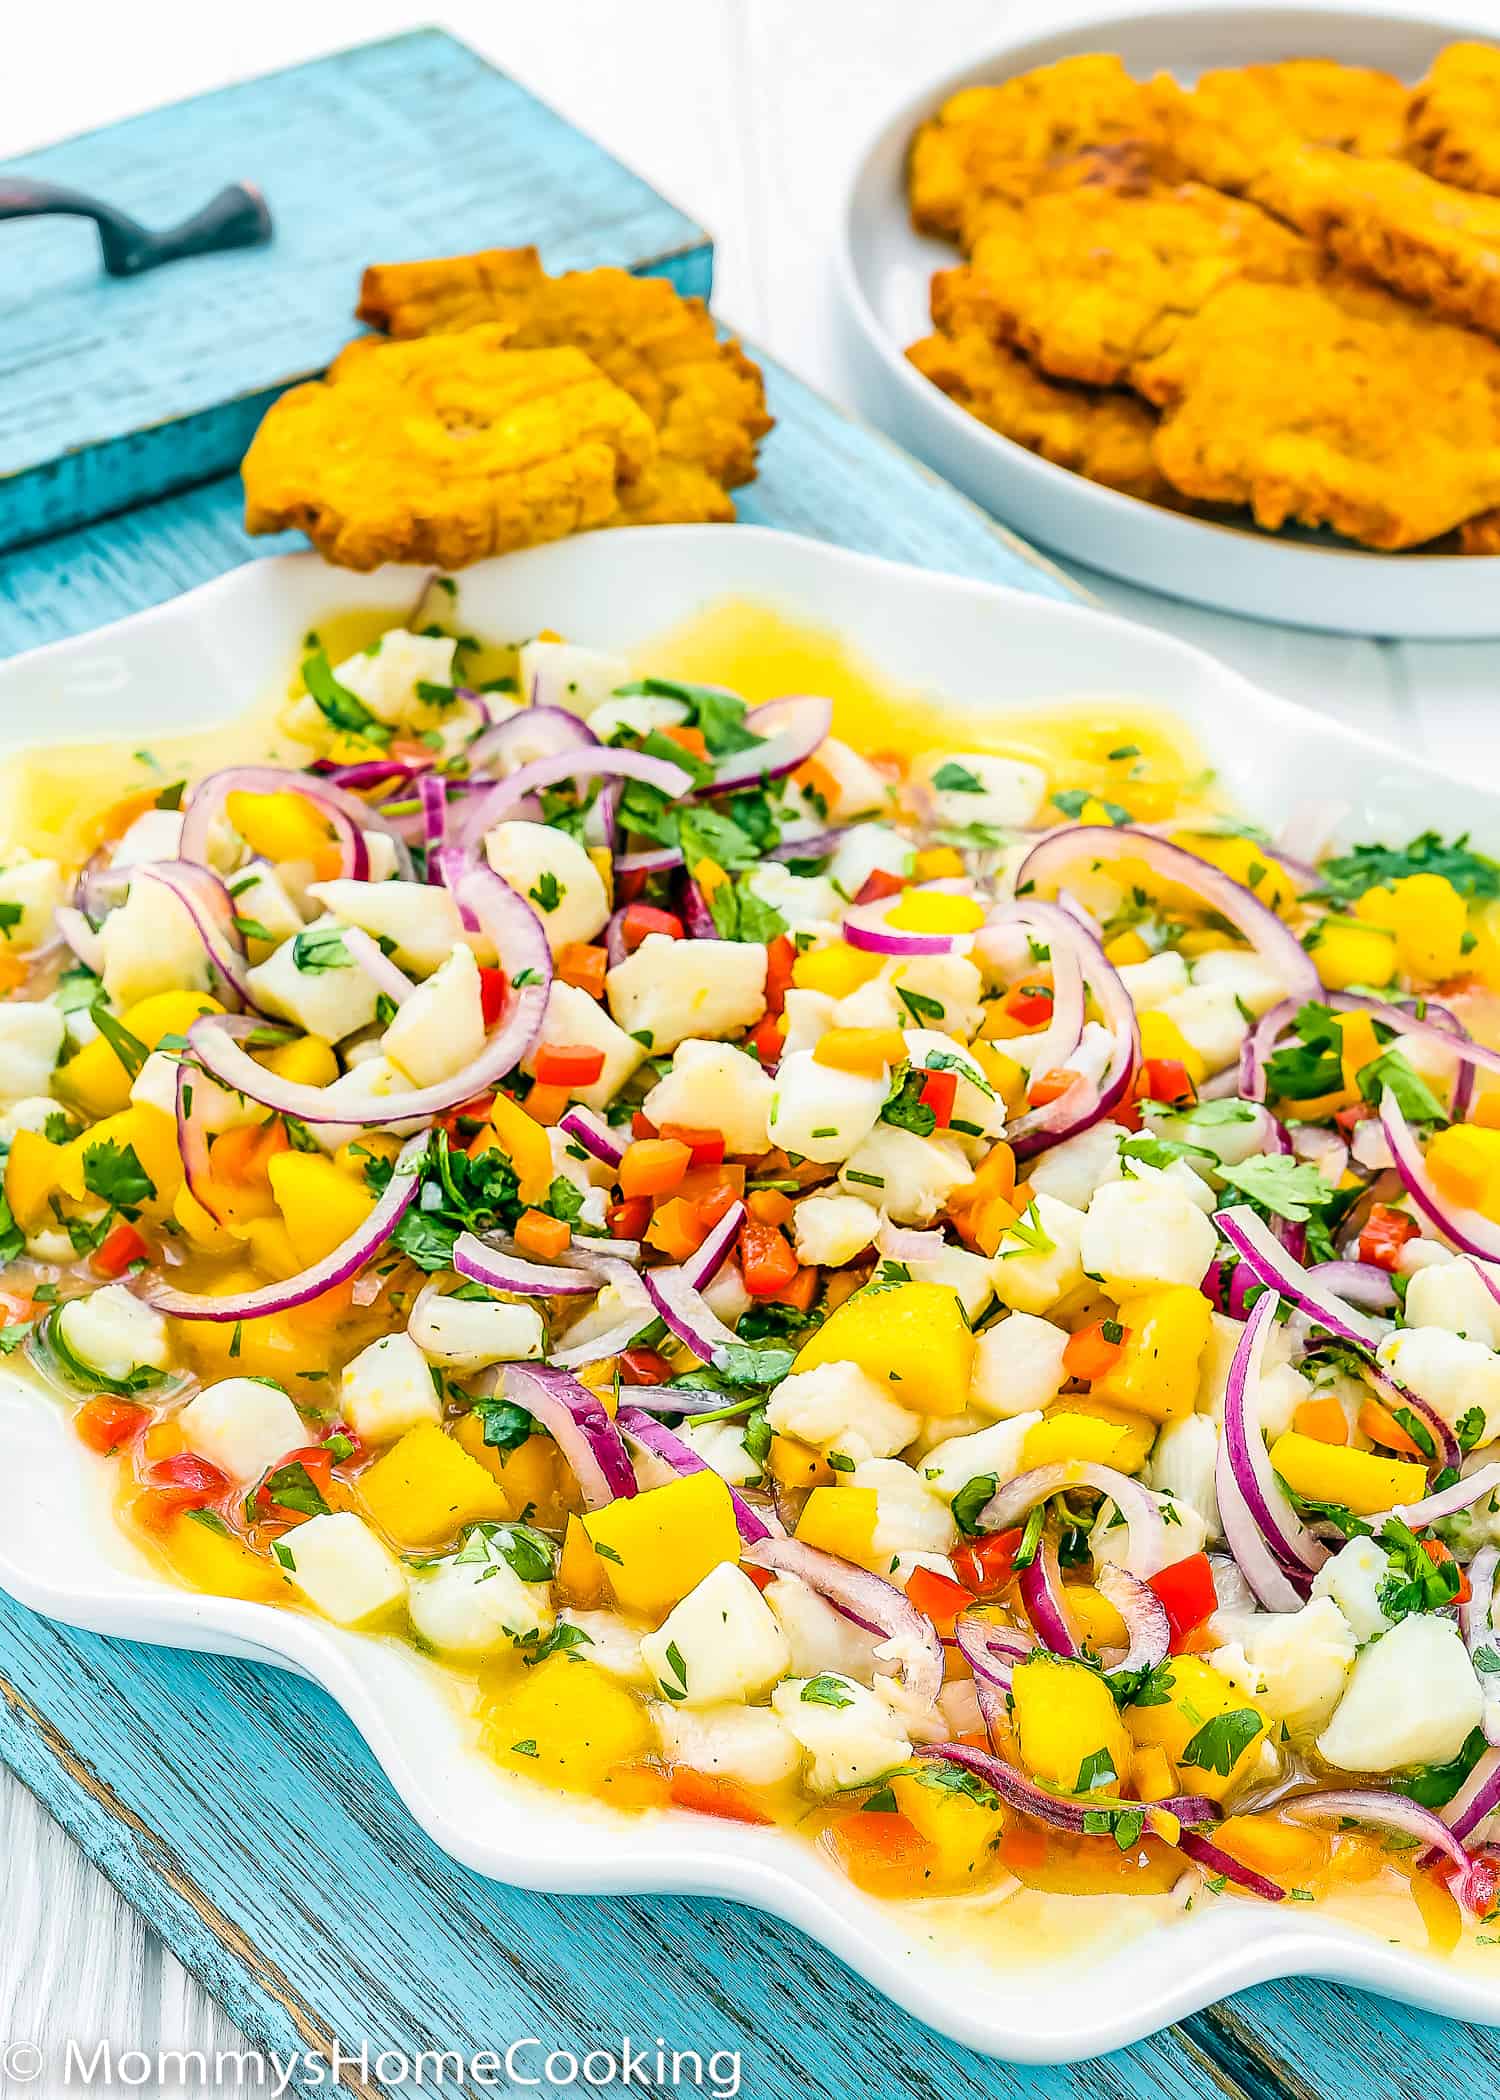 Fish ceviche with mango in a big serving plate with tostones on the side.